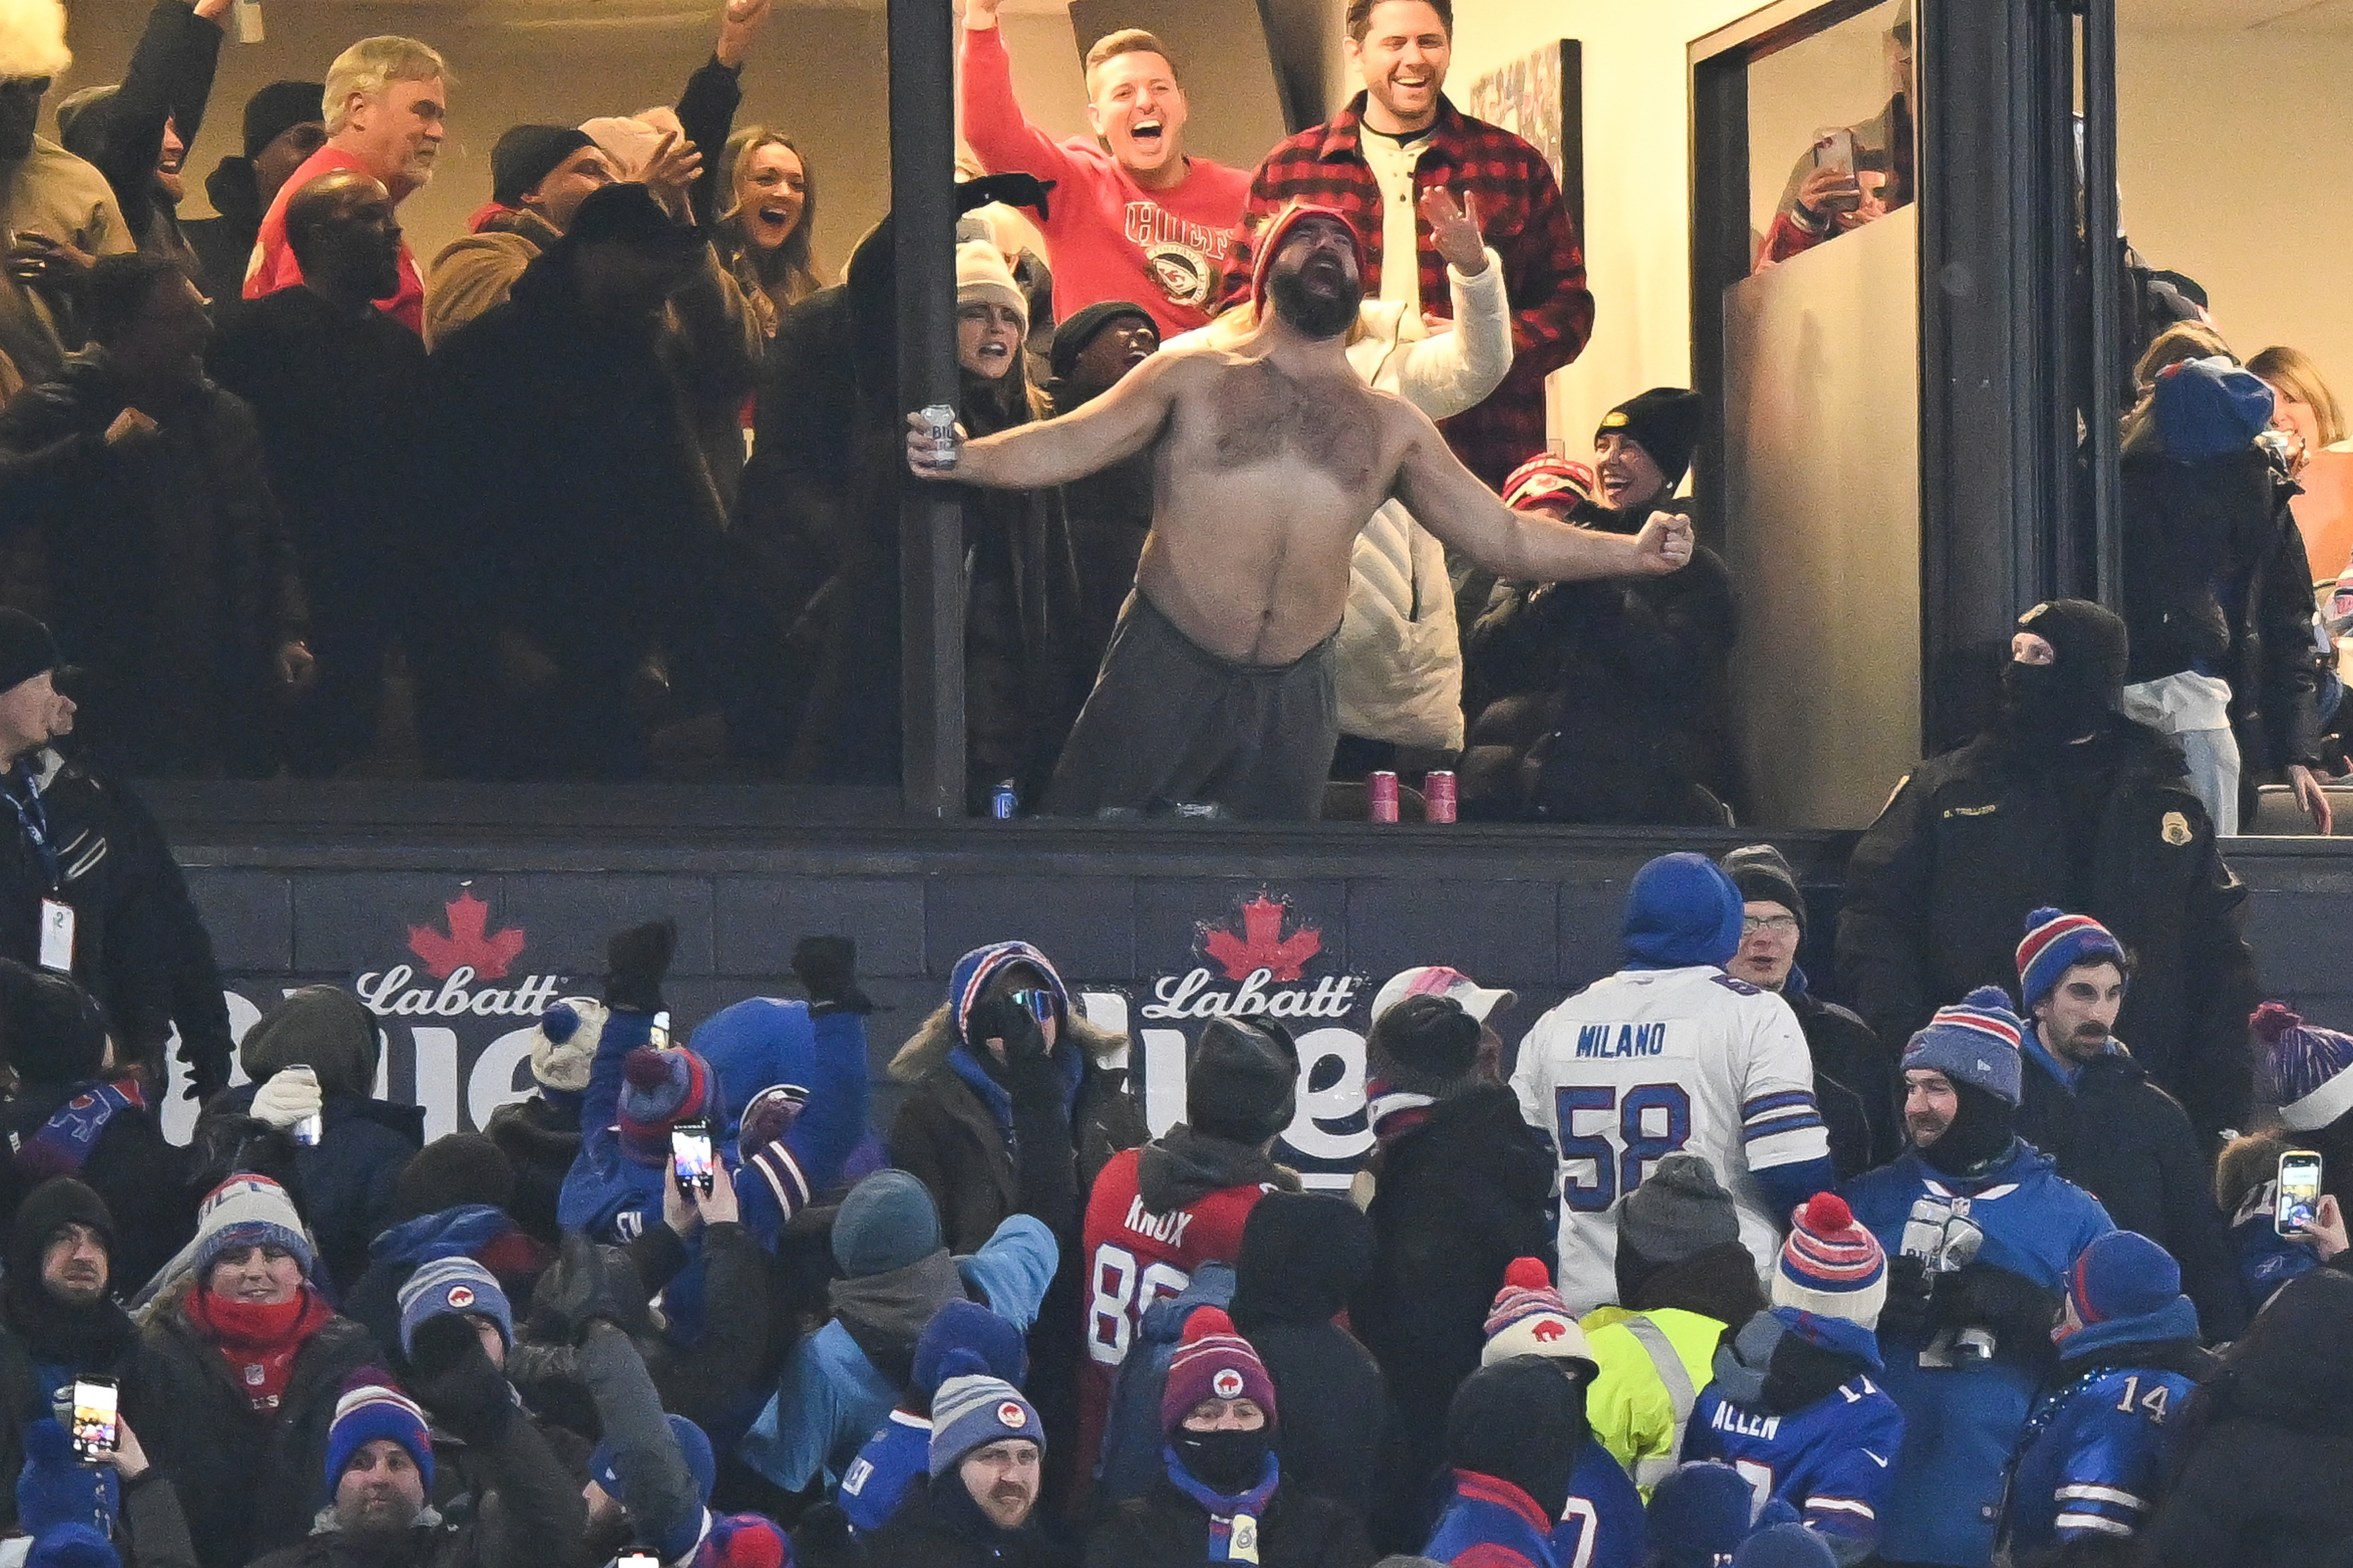 jason leaning shirtless out of the window with Bills fans below him